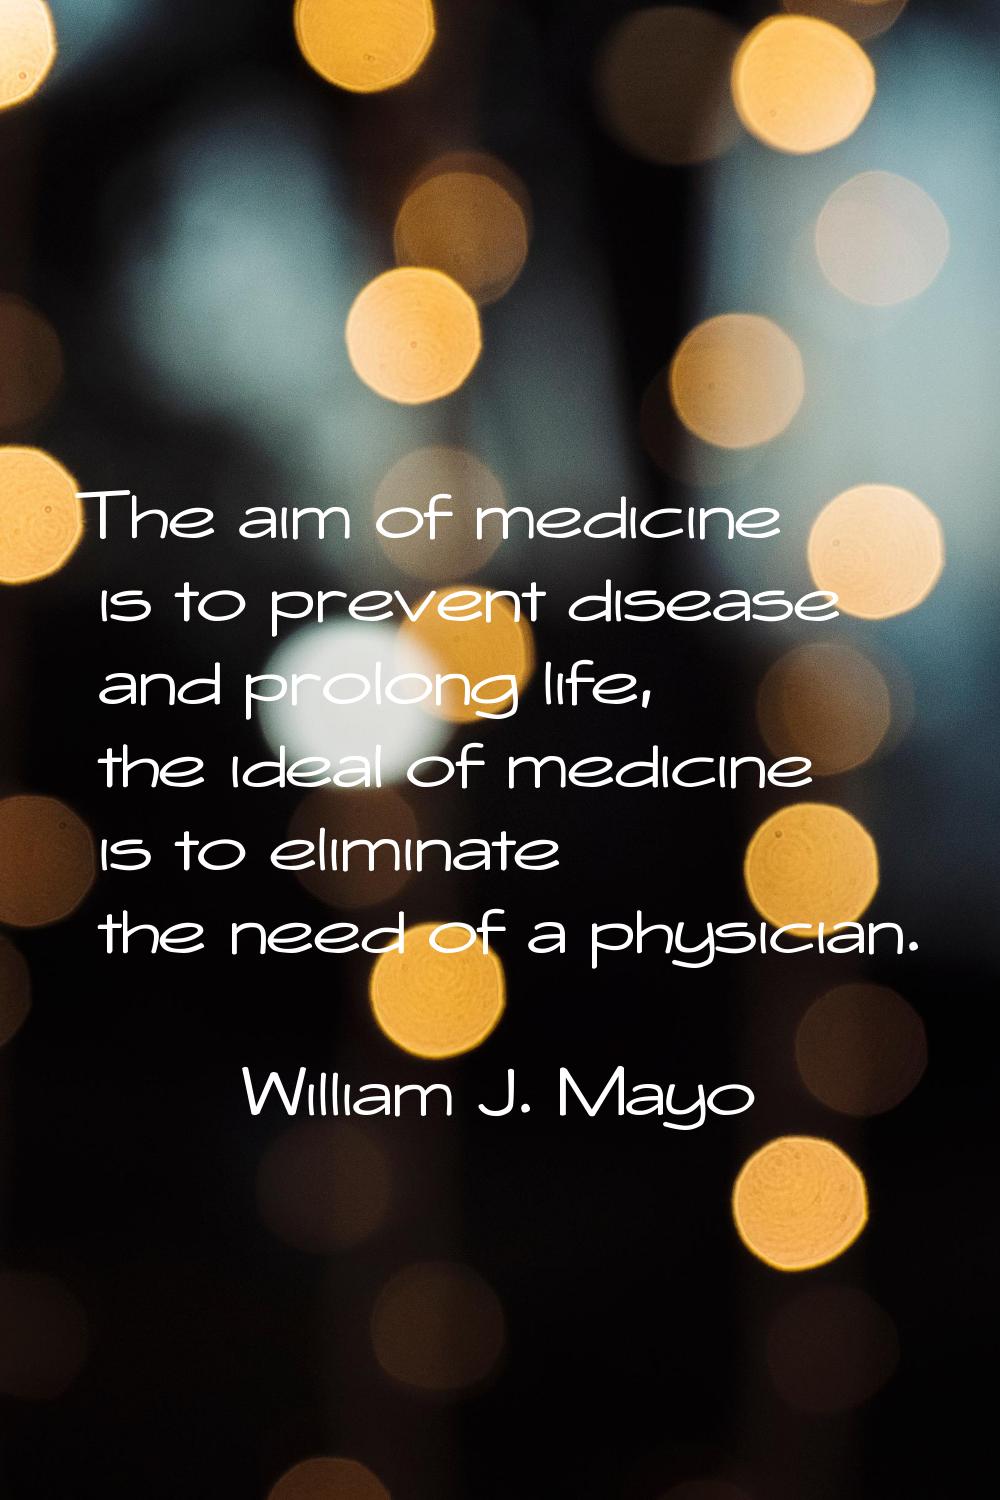 The aim of medicine is to prevent disease and prolong life, the ideal of medicine is to eliminate t